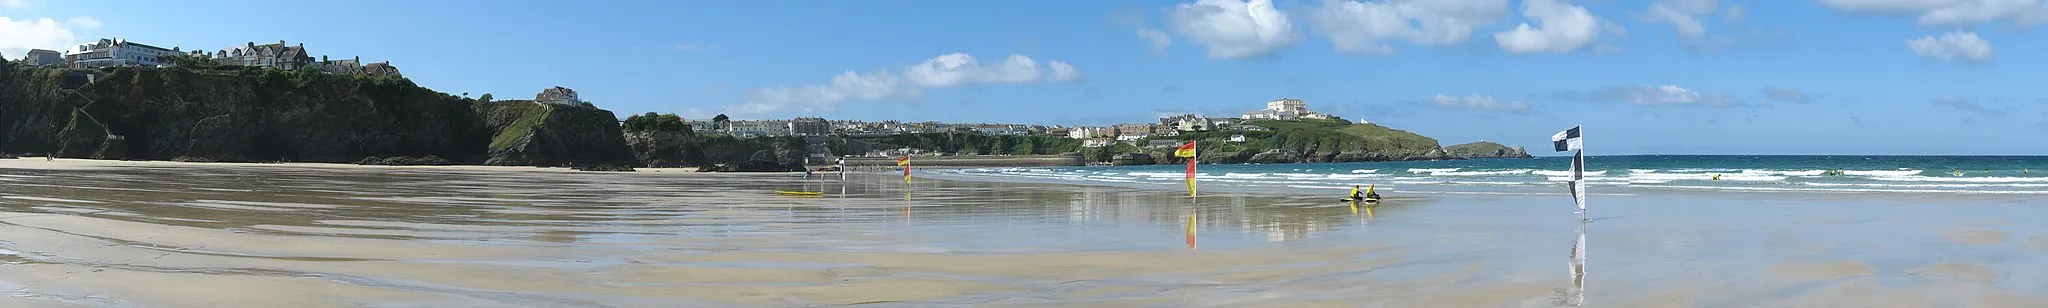 Photo showing: Panorama westward from Tolcarne Beach, Newquay, at close to low-tide. From left to right: Newquay buildings on clifftop; Newquay harbour entrance; The Atlantic Hotel and headland; Towan Head in distance. Two lifeguards sitting on boards in the foreground.